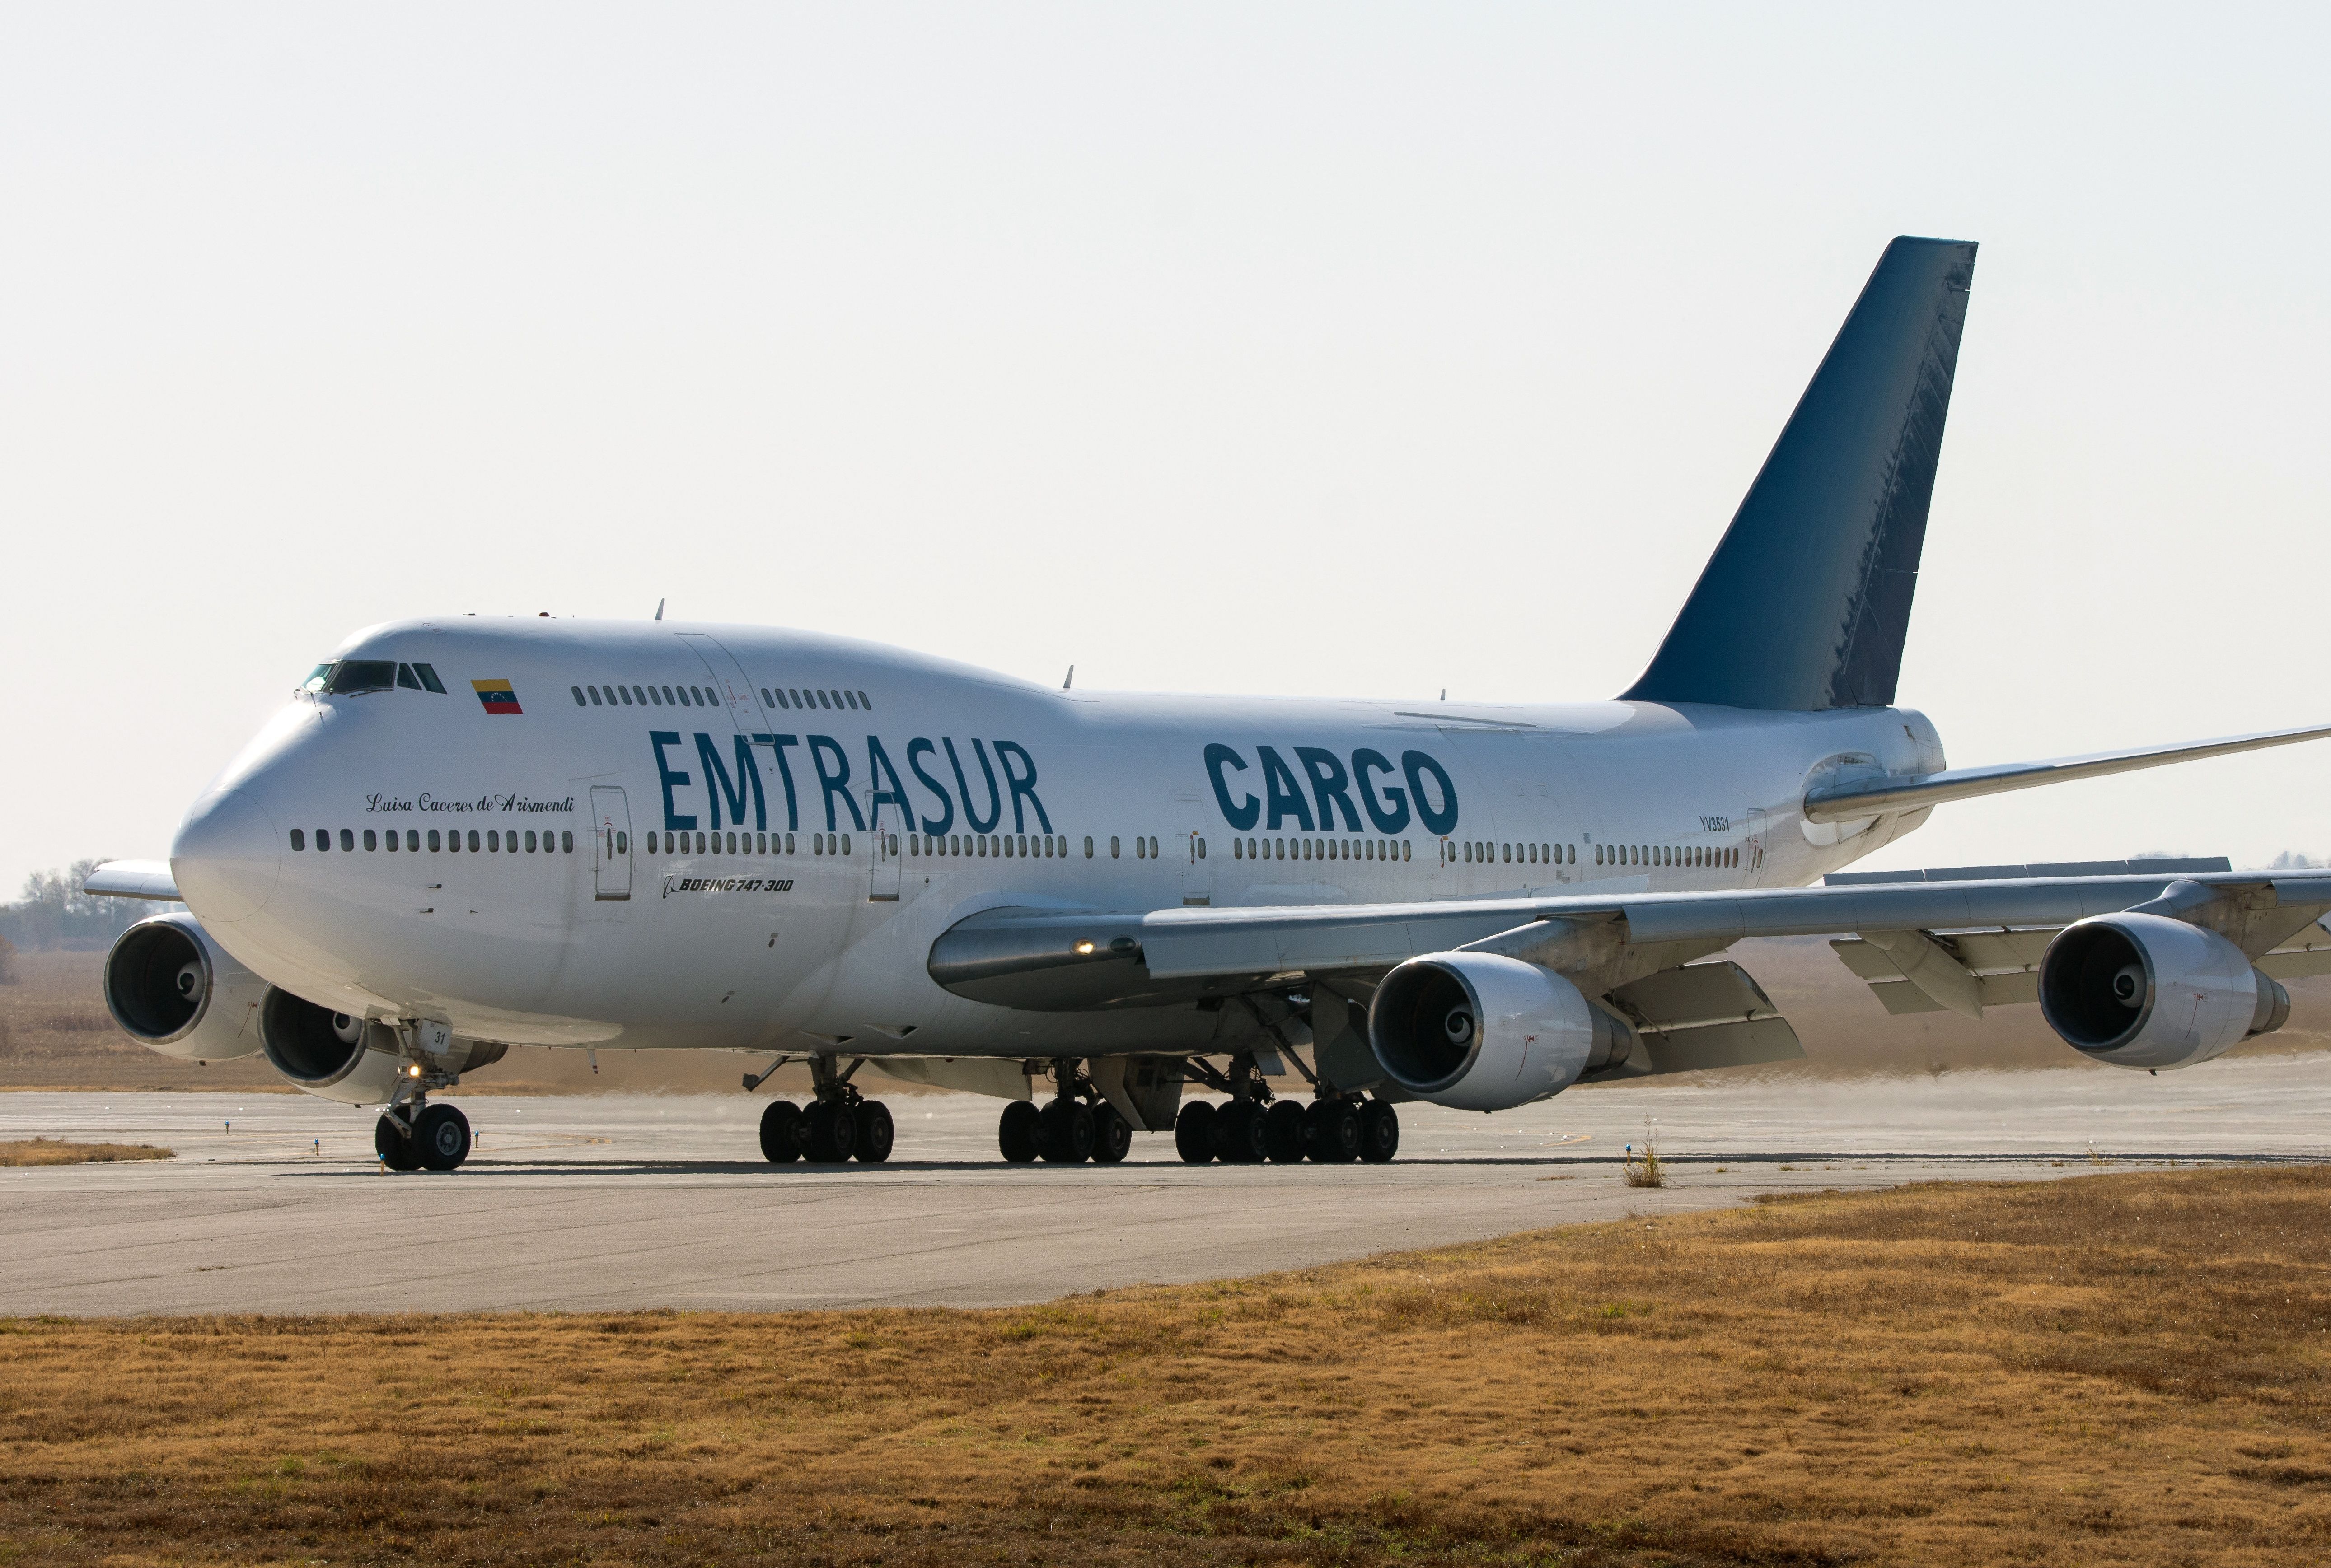 The Emtrasur Boeing 747-300M on the ground in Buenos Aires